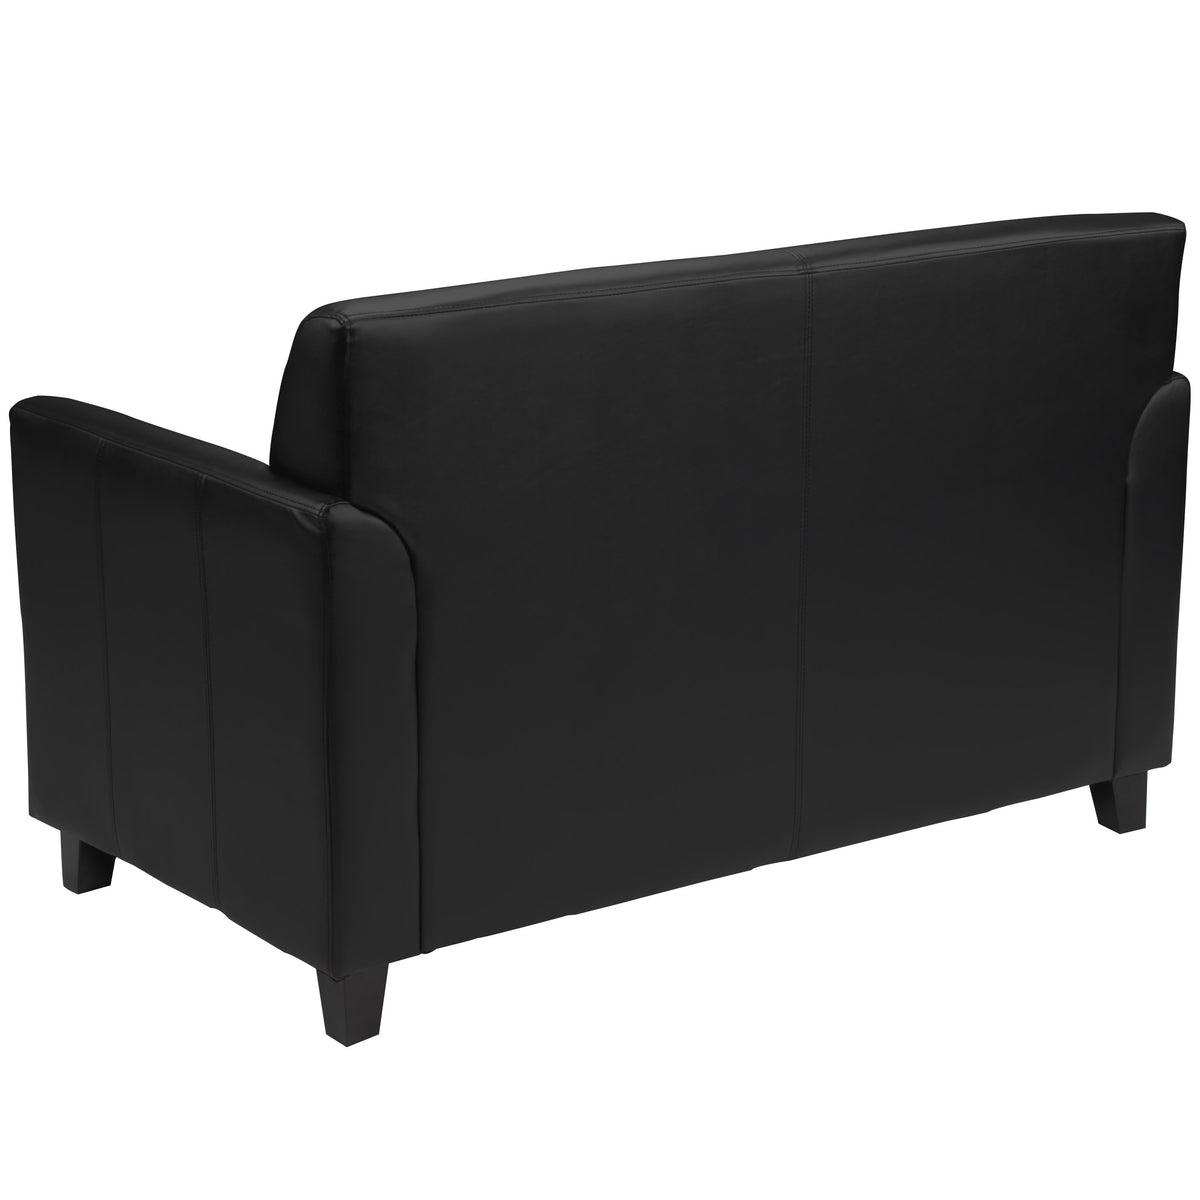 Black |#| Black LeatherSoft Loveseat w/ Clean Line Stitched Frame - Reception Seating